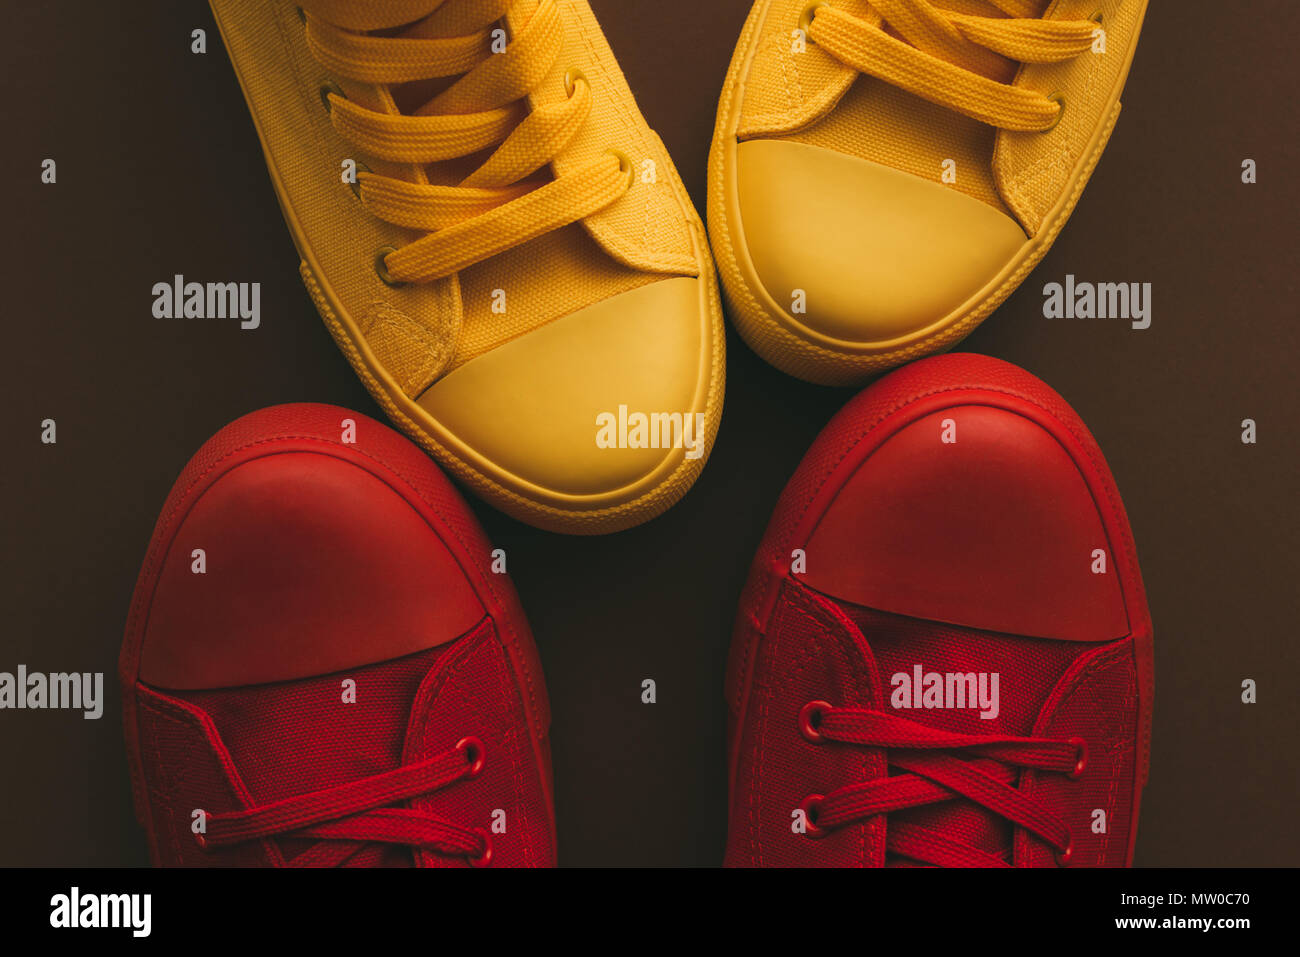 Young couple on a love date, conceptual image. Top view of two pair of casual sneakers, yellow and red, from above close to and facing each other like Stock Photo